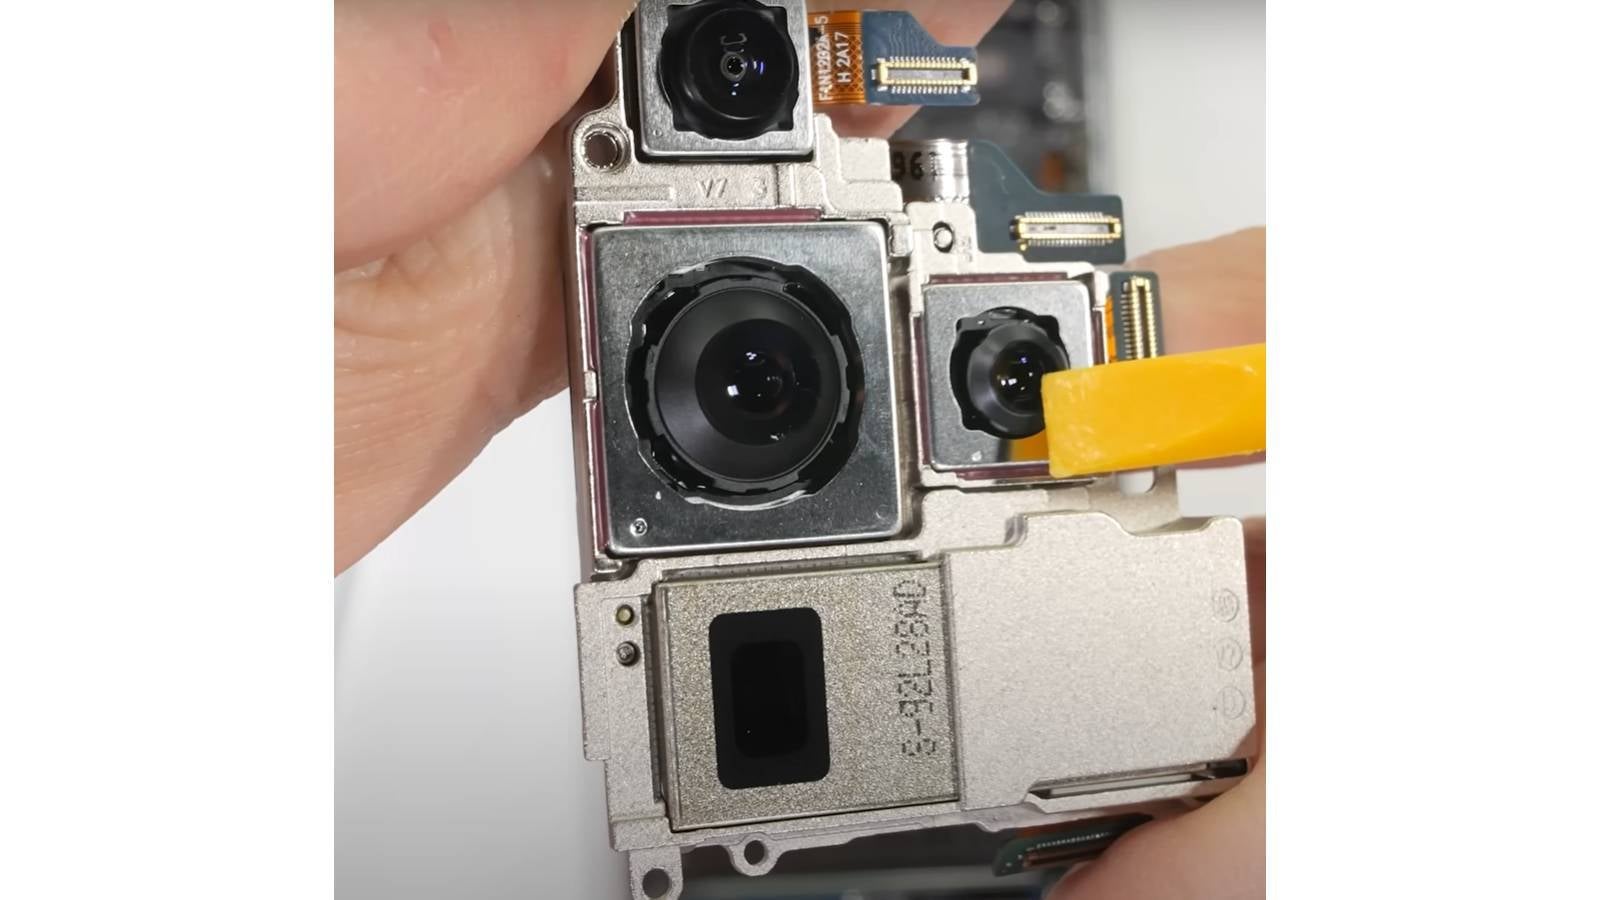 Galaxy S23 Ultra's camera array features a 10x periscope camera - Galaxy S24 Ultra factory leak appears to confirm worst suspicions about the phone